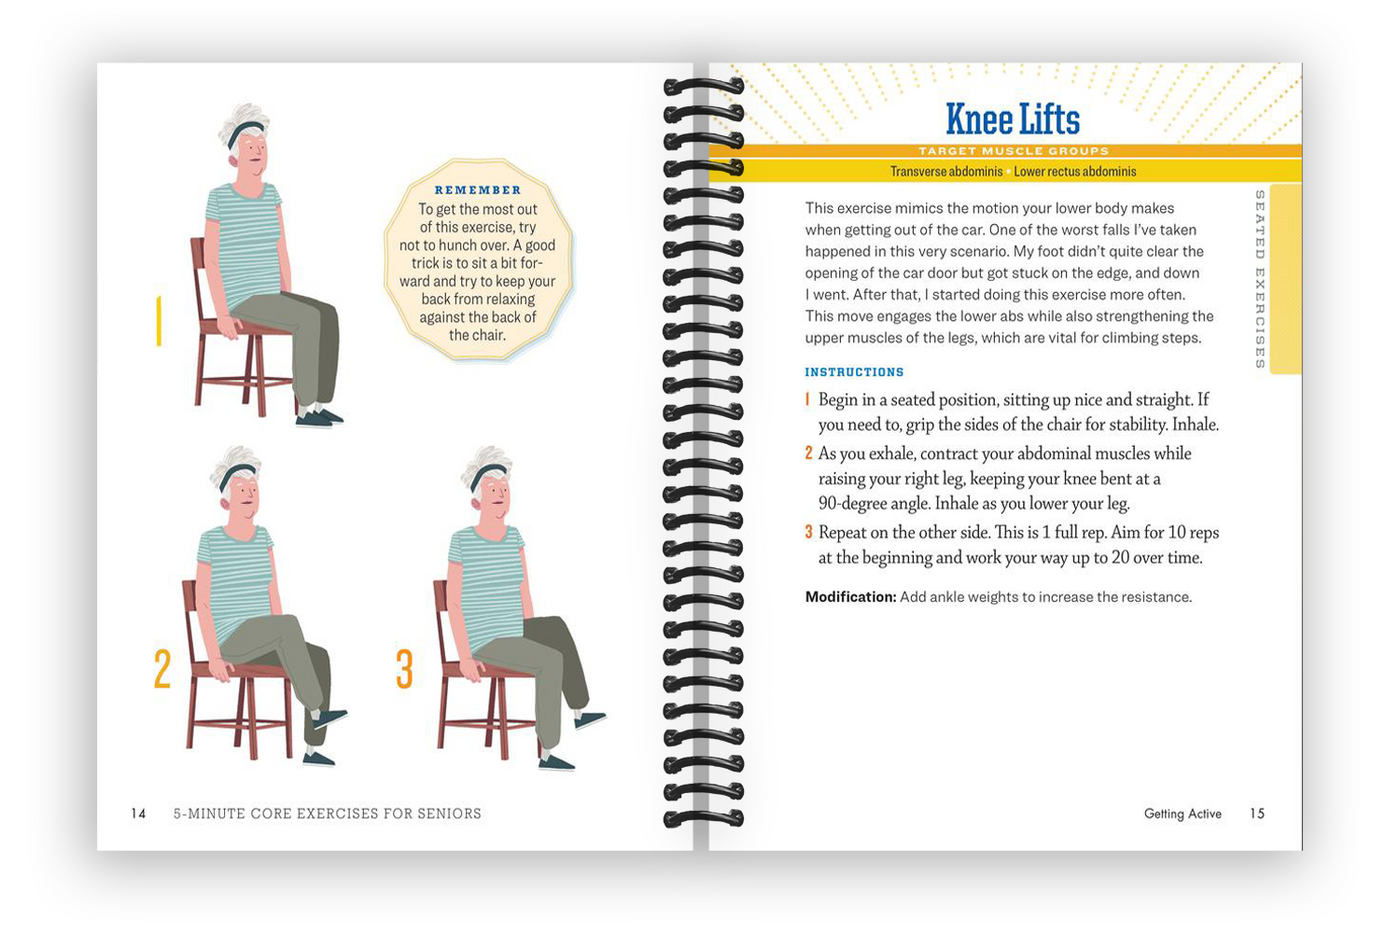 5-Minute Core Exercise Cards for Seniors: Daily Routines to Build